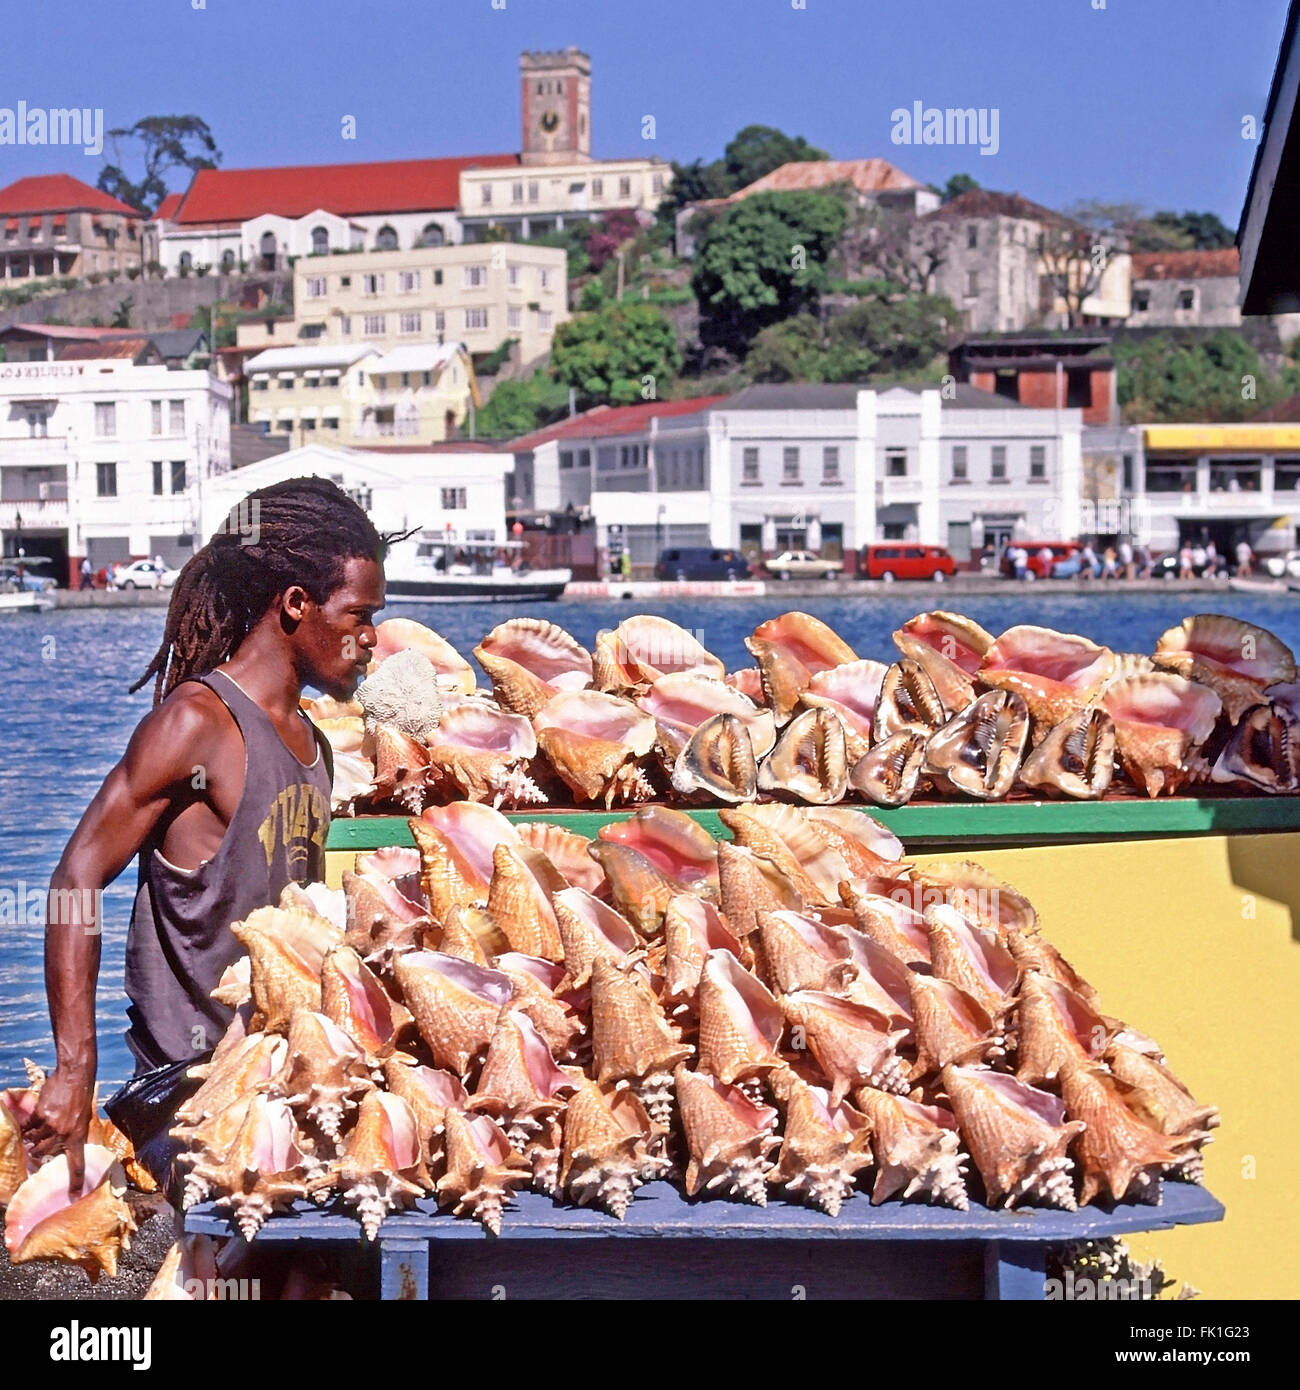 Grenada Caribbean St Georges harbour in the Caribbean Sea waterside trader & market stall selling conch shells to tourists from cruise ship liners Stock Photo